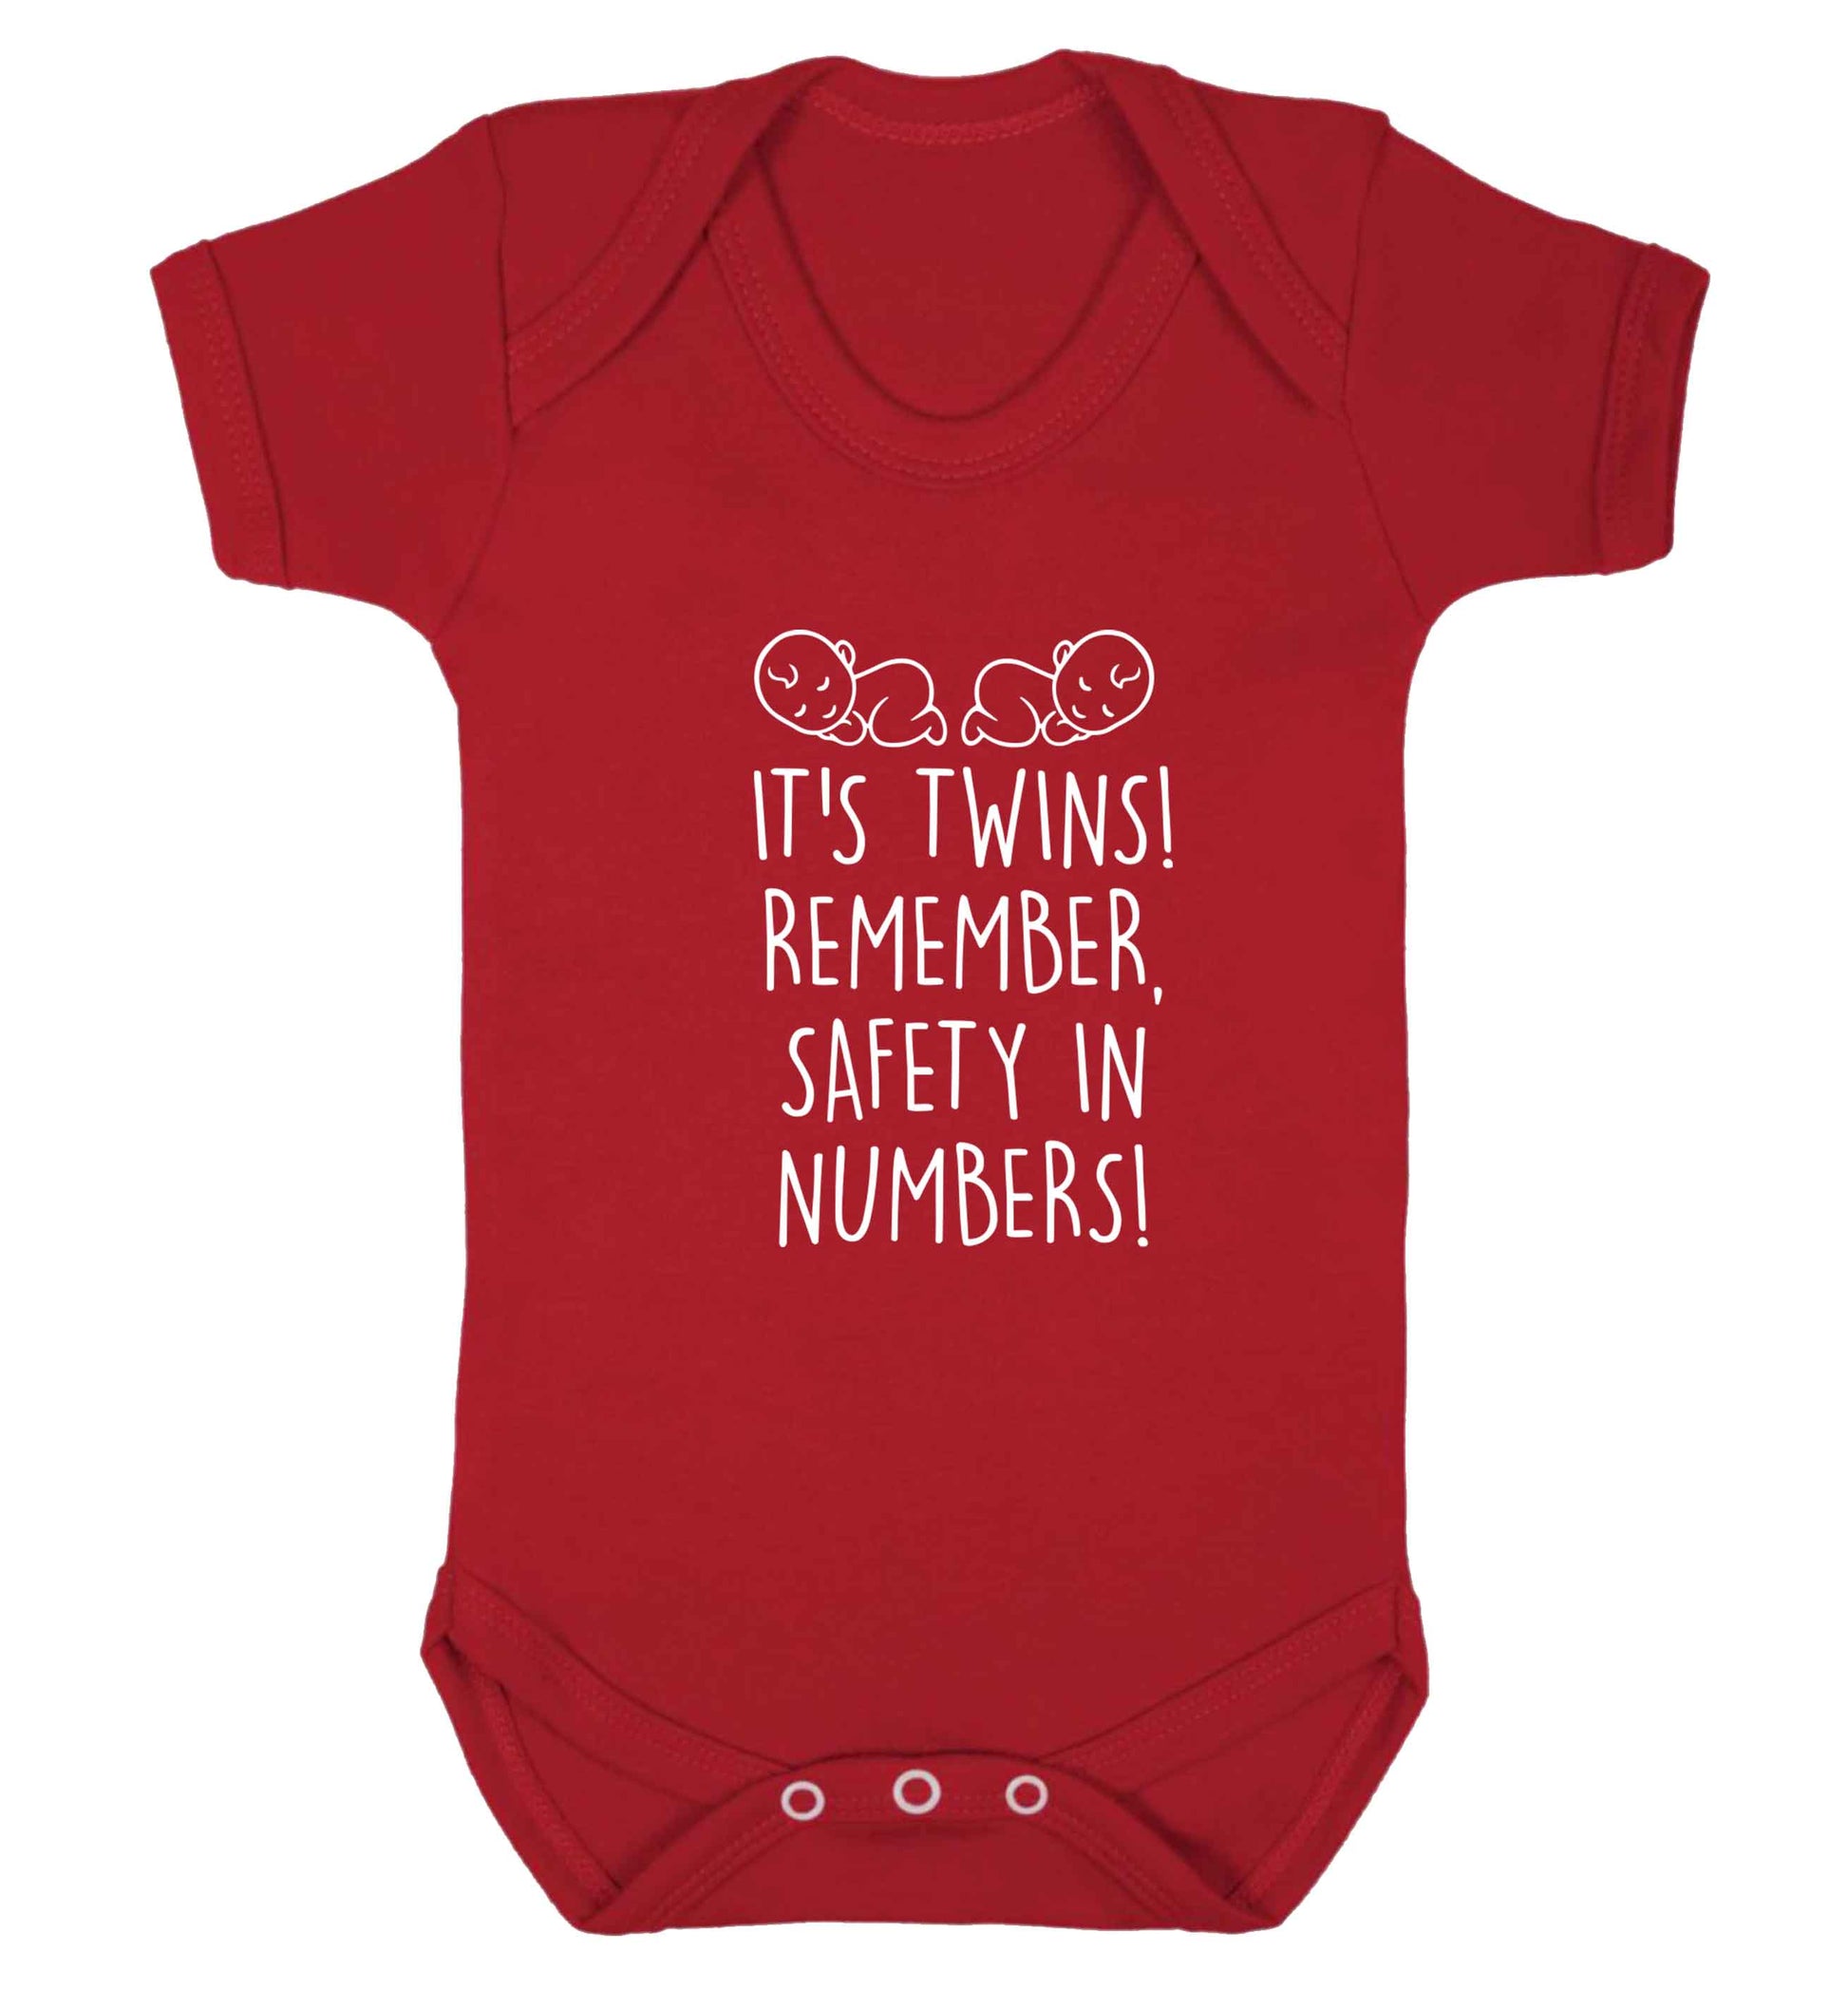 It's twins! Remember safety in numbers! baby vest red 18-24 months